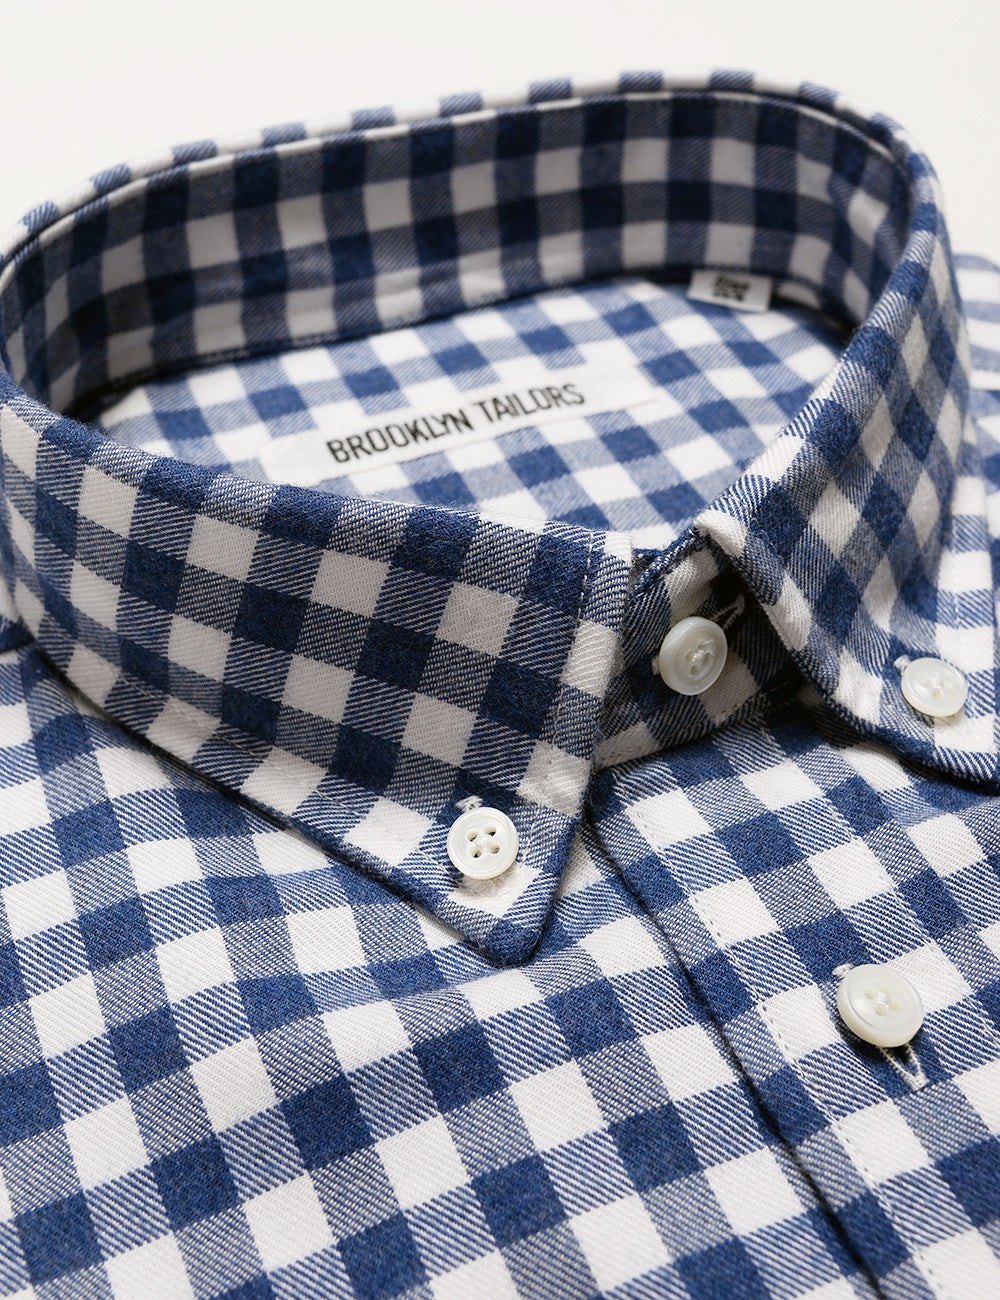 BROOKLYN TAILORS - BKT10 Slim Casual Shirt in Brushed Cotton Gingham - Blue and White